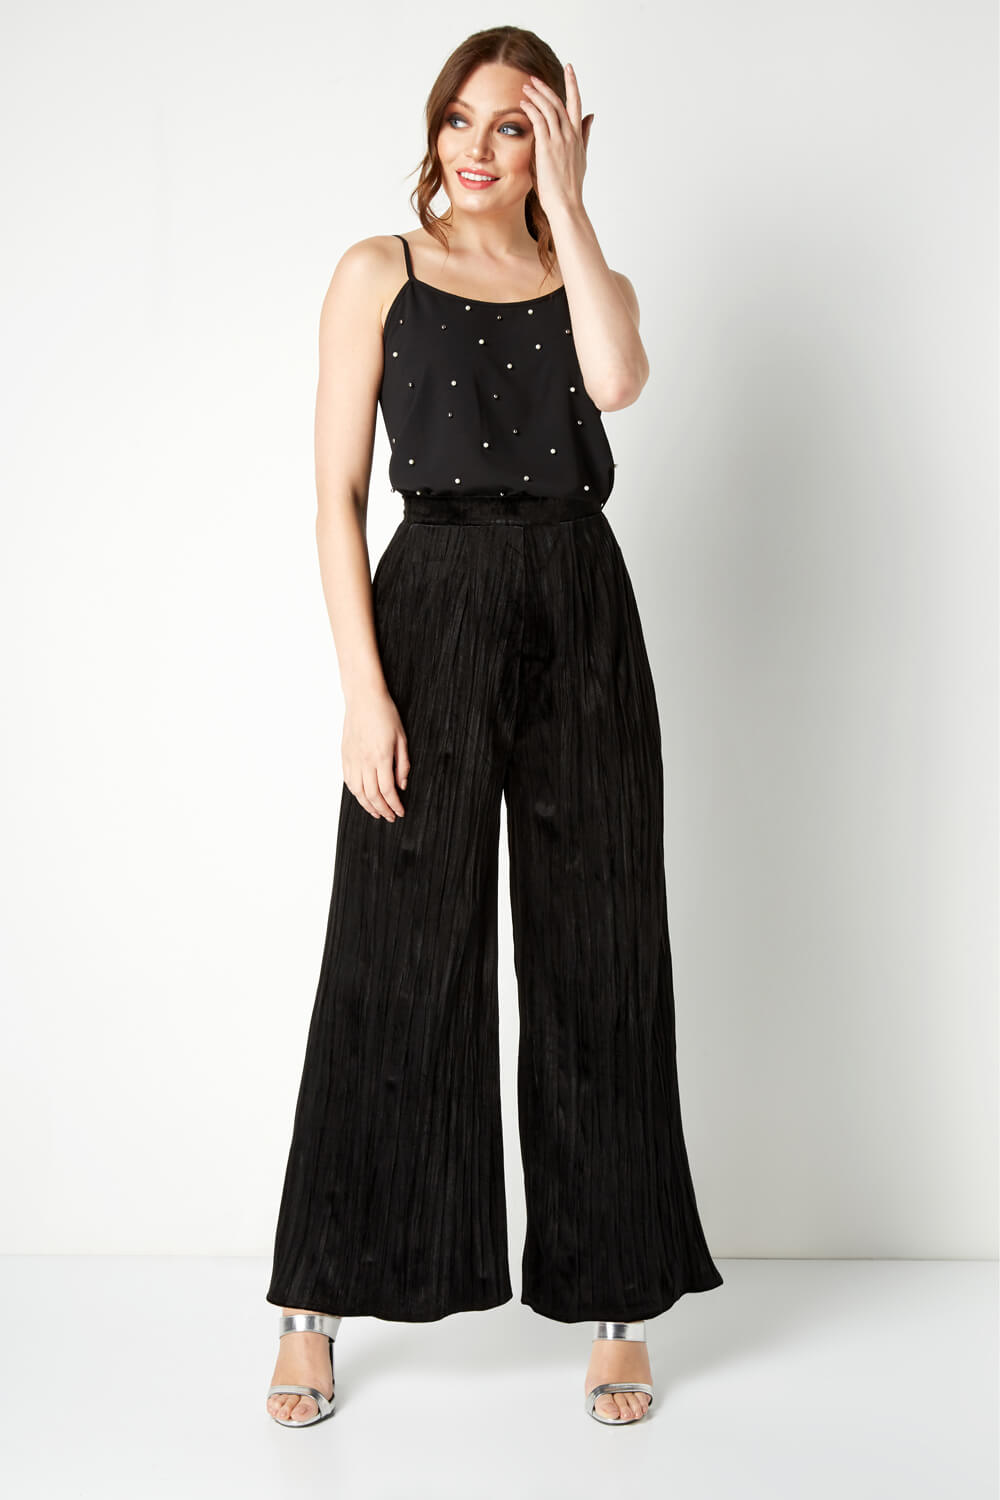 Black Crushed Velour Palazzo Trousers, Image 3 of 4